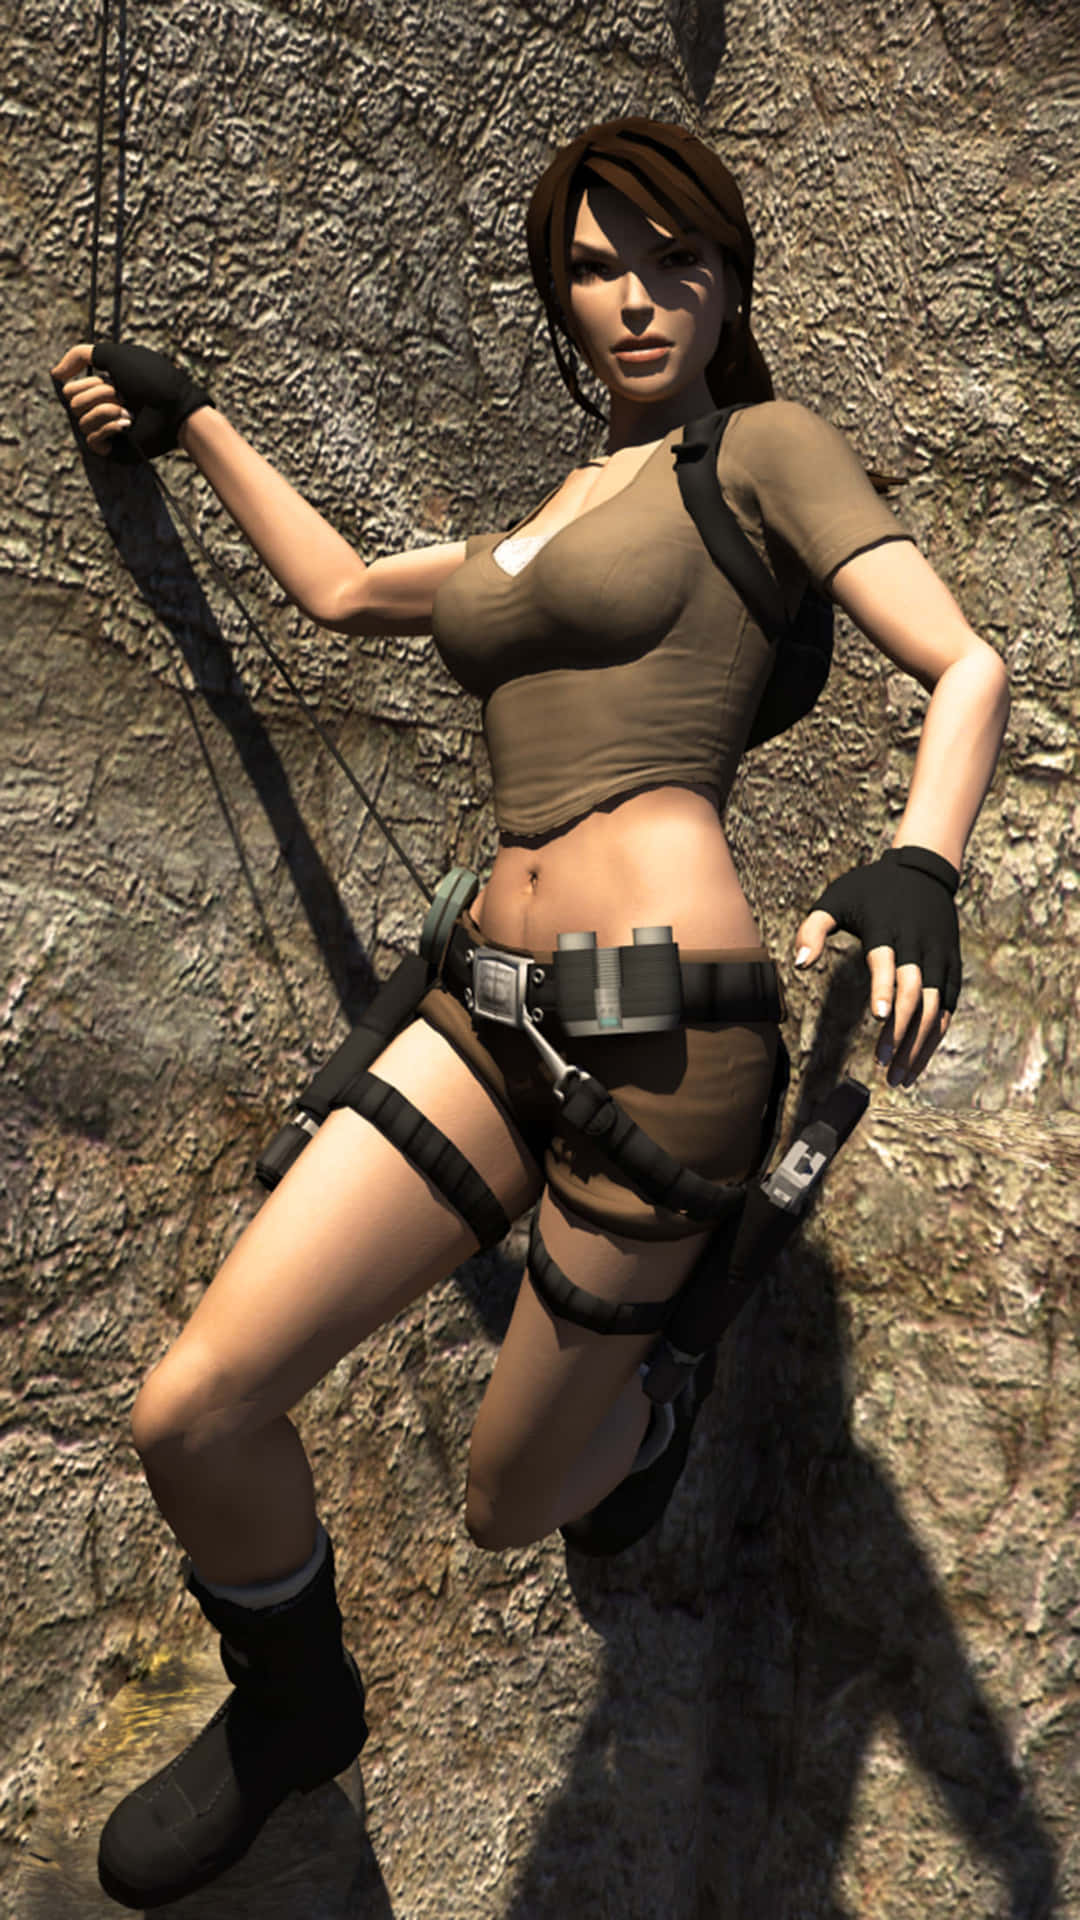 Play Tomb Raider on your iPhone Wallpaper